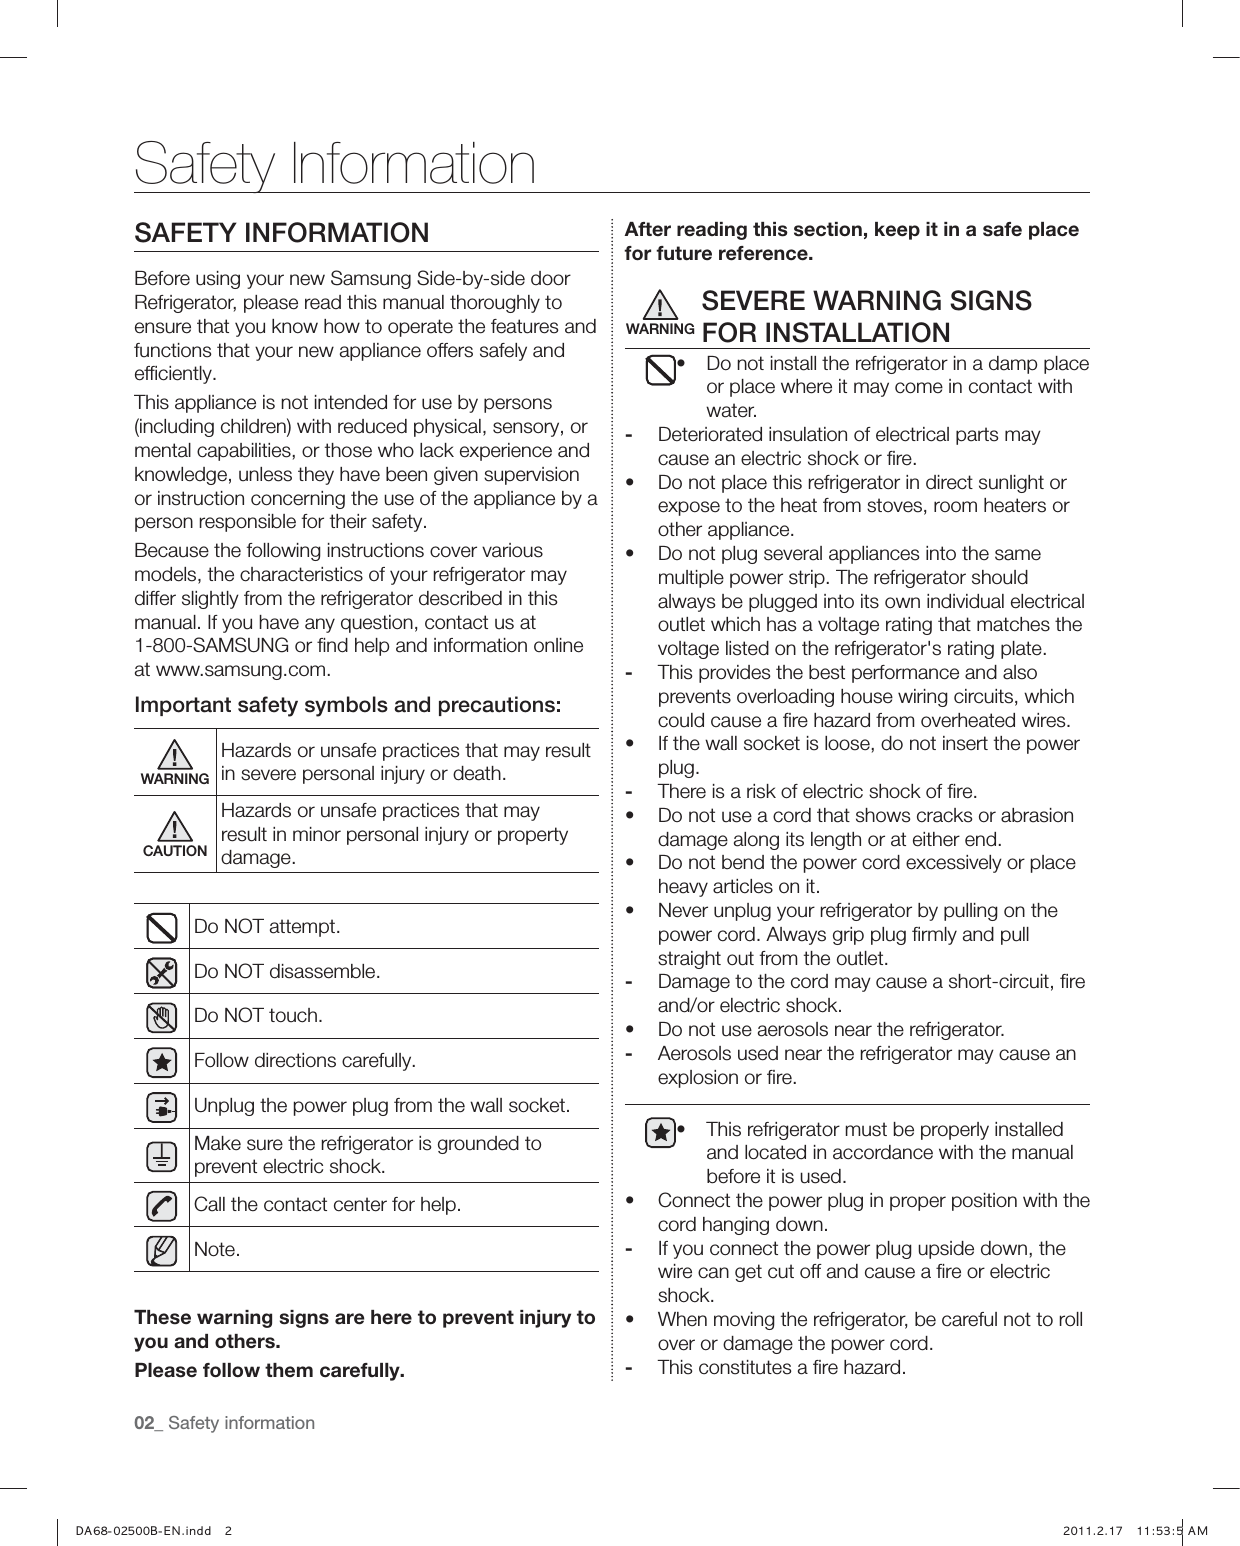 02_ Safety informationSAFETY INFORMATIONBefore using your new Samsung Side-by-side door Refrigerator, please read this manual thoroughly to ensure that you know how to operate the features and functions that your new appliance offers safely and efﬁciently.This appliance is not intended for use by persons (including children) with reduced physical, sensory, or mental capabilities, or those who lack experience and knowledge, unless they have been given supervision or instruction concerning the use of the appliance by a person responsible for their safety.Because the following instructions cover various models, the characteristics of your refrigerator may differ slightly from the refrigerator described in this manual. If you have any question, contact us at 1-800-SAMSUNG or ﬁnd help and information online at www.samsung.com.Important safety symbols and precautions:WARNINGHazards or unsafe practices that may result in severe personal injury or death.CAUTIONHazards or unsafe practices that may result in minor personal injury or property damage.Do NOT attempt.Do NOT disassemble.Do NOT touch.Follow directions carefully.Unplug the power plug from the wall socket.Make sure the refrigerator is grounded to prevent electric shock.Call the contact center for help.Note.These warning signs are here to prevent injury to you and others.Please follow them carefully.After reading this section, keep it in a safe place for future reference.SEVERE WARNING SIGNS FOR INSTALLATIONŘ Do not install the refrigerator in a damp place or place where it may come in contact with water.-  Deteriorated insulation of electrical parts may cause an electric shock or ﬁre.Ř Do not place this refrigerator in direct sunlight or expose to the heat from stoves, room heaters or other appliance.Ř Do not plug several appliances into the same multiple power strip. The refrigerator should always be plugged into its own individual electrical outlet which has a voltage rating that matches the voltage listed on the refrigerator&apos;s rating plate.-  This provides the best performance and also prevents overloading house wiring circuits, which could cause a ﬁre hazard from overheated wires.Ř If the wall socket is loose, do not insert the power plug.-  There is a risk of electric shock of ﬁre.Ř Do not use a cord that shows cracks or abrasion damage along its length or at either end.Ř Do not bend the power cord excessively or place heavy articles on it.Ř Never unplug your refrigerator by pulling on the power cord. Always grip plug ﬁrmly and pull straight out from the outlet.-  Damage to the cord may cause a short-circuit, ﬁre and/or electric shock.Ř Do not use aerosols near the refrigerator.-  Aerosols used near the refrigerator may cause an explosion or ﬁre.Ř This refrigerator must be properly installed and located in accordance with the manual before it is used.Ř Connect the power plug in proper position with the cord hanging down.-  If you connect the power plug upside down, the wire can get cut off and cause a ﬁre or electric shock.Ř When moving the refrigerator, be careful not to roll over or damage the power cord.-  This constitutes a ﬁre hazard.Safety InformationWARNING,) *-6QVLL &quot;&quot;)5